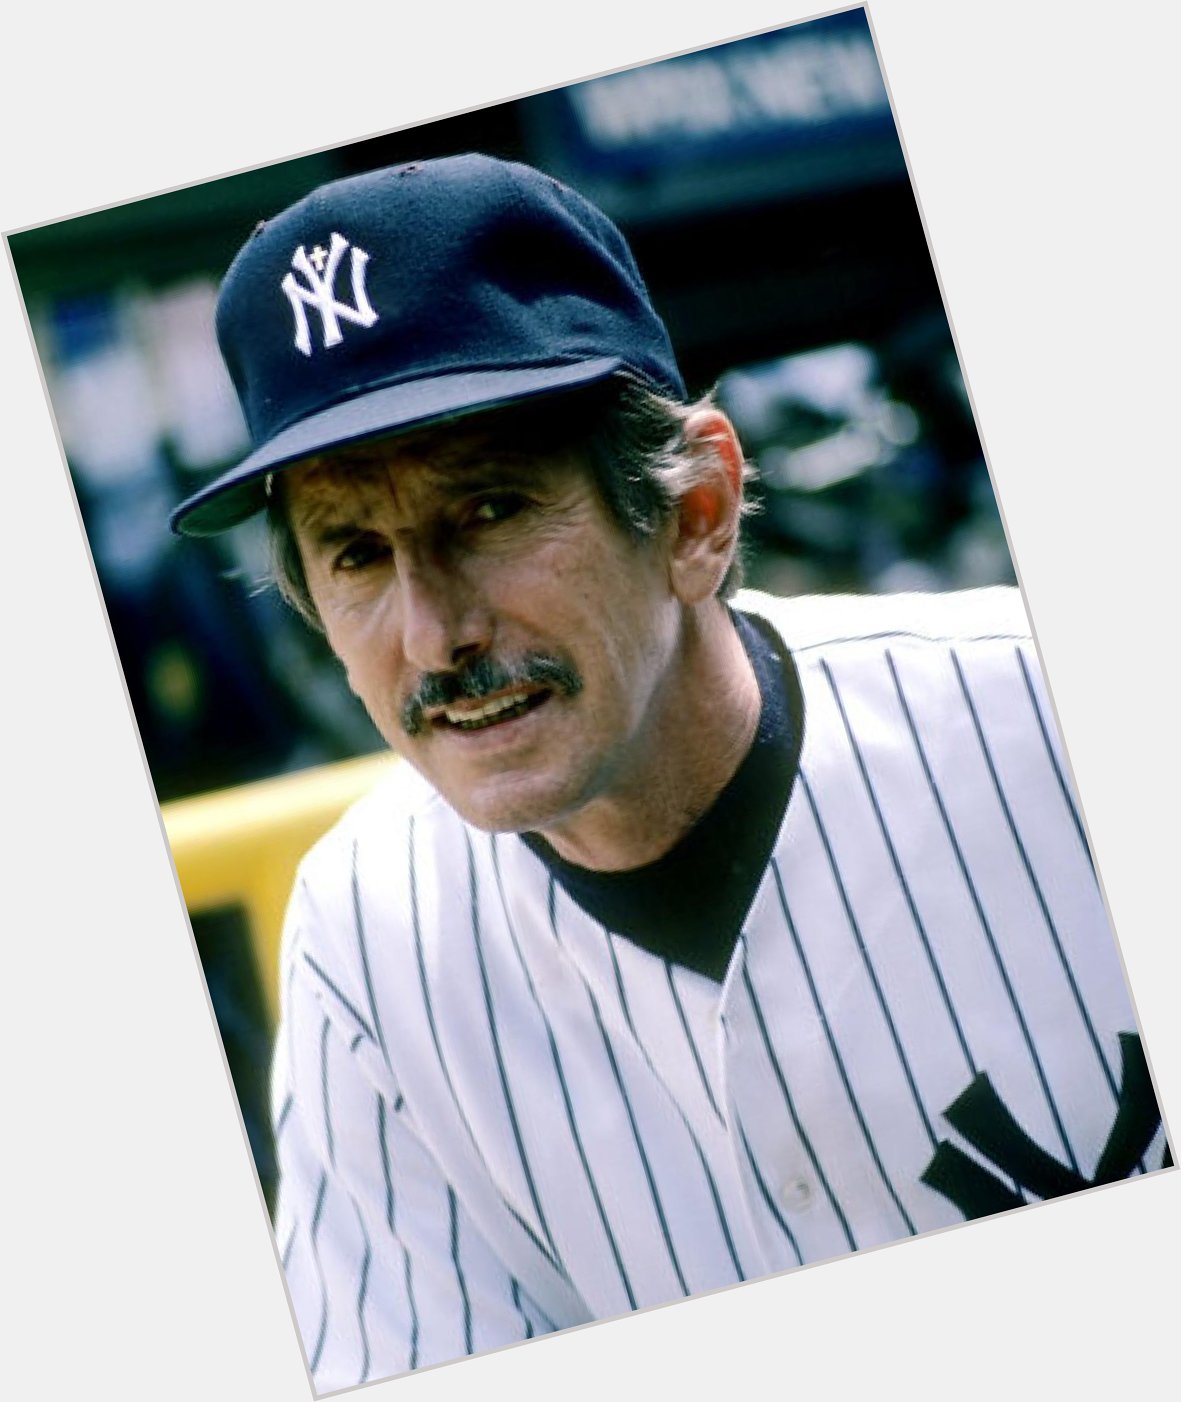 Happy Birthday to Billy Martin, who would have turned 87 today! 